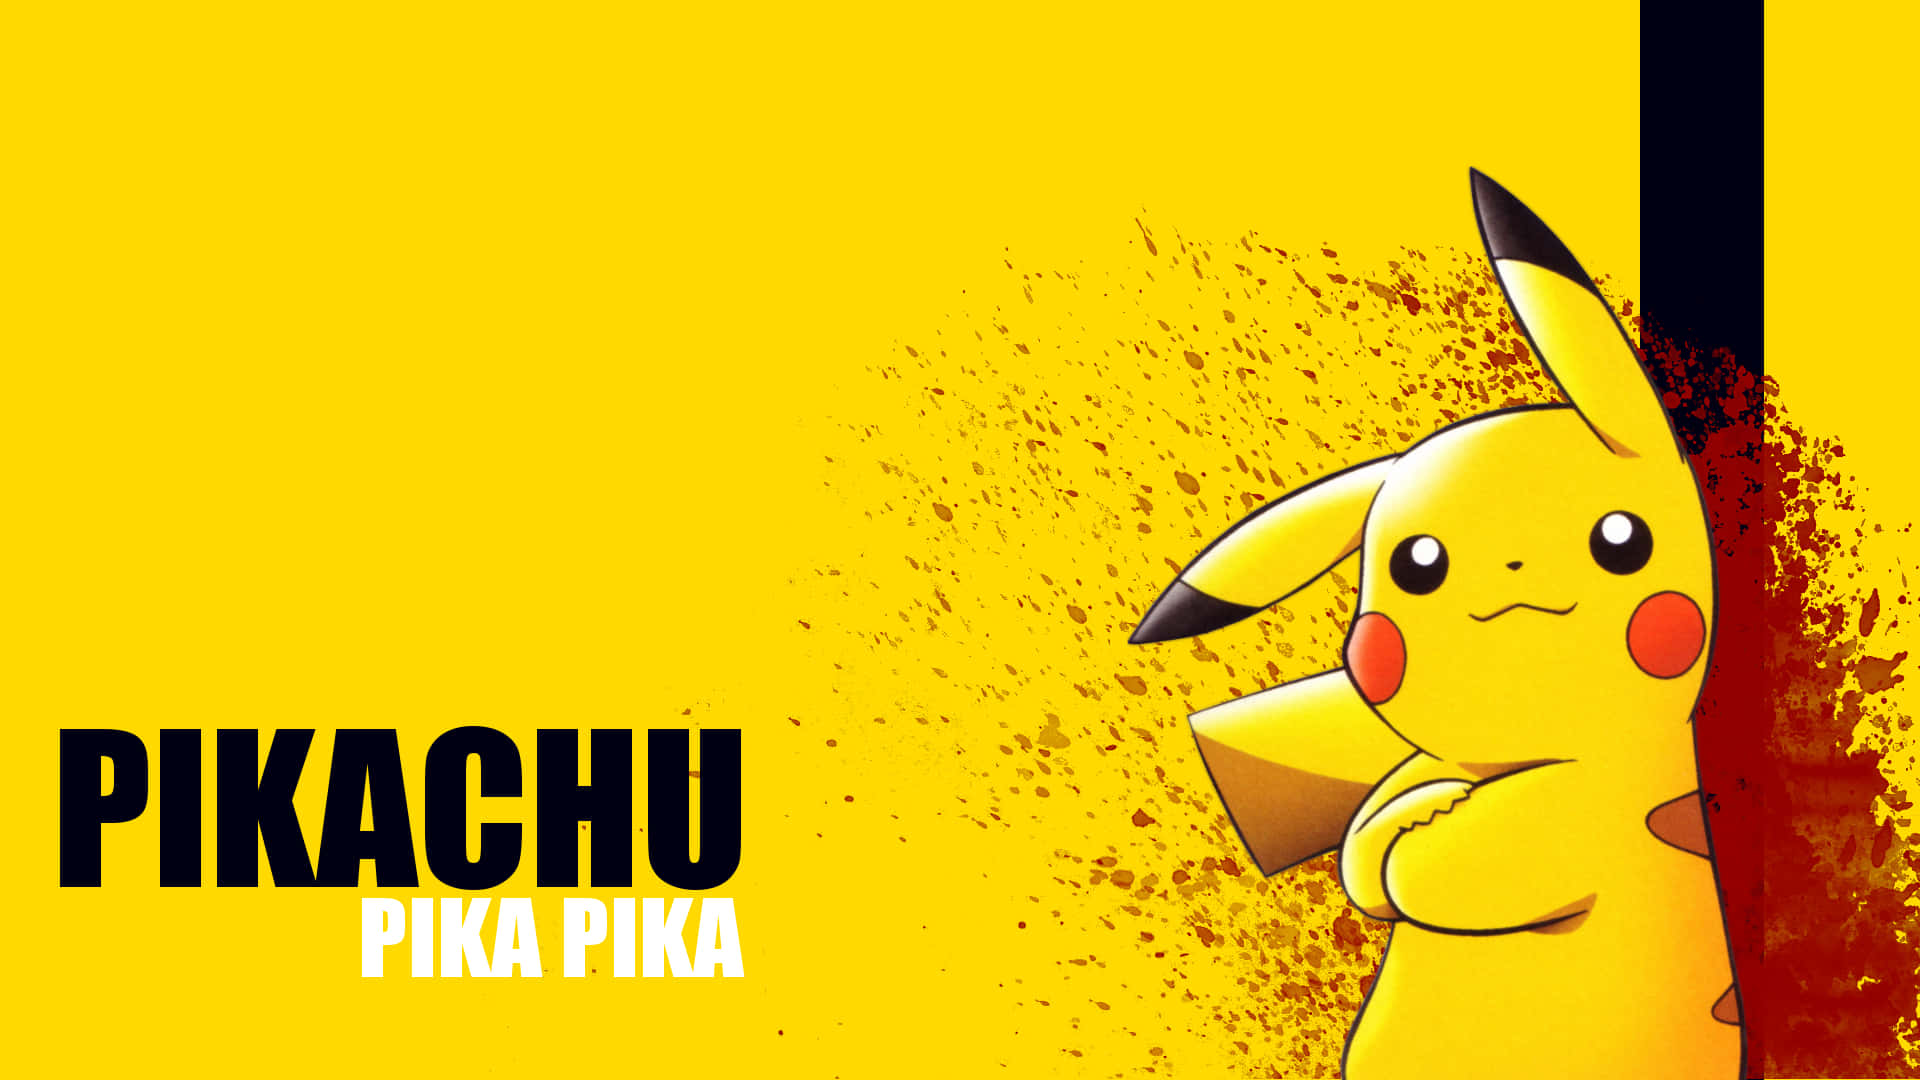 Pikachu in all its glory!